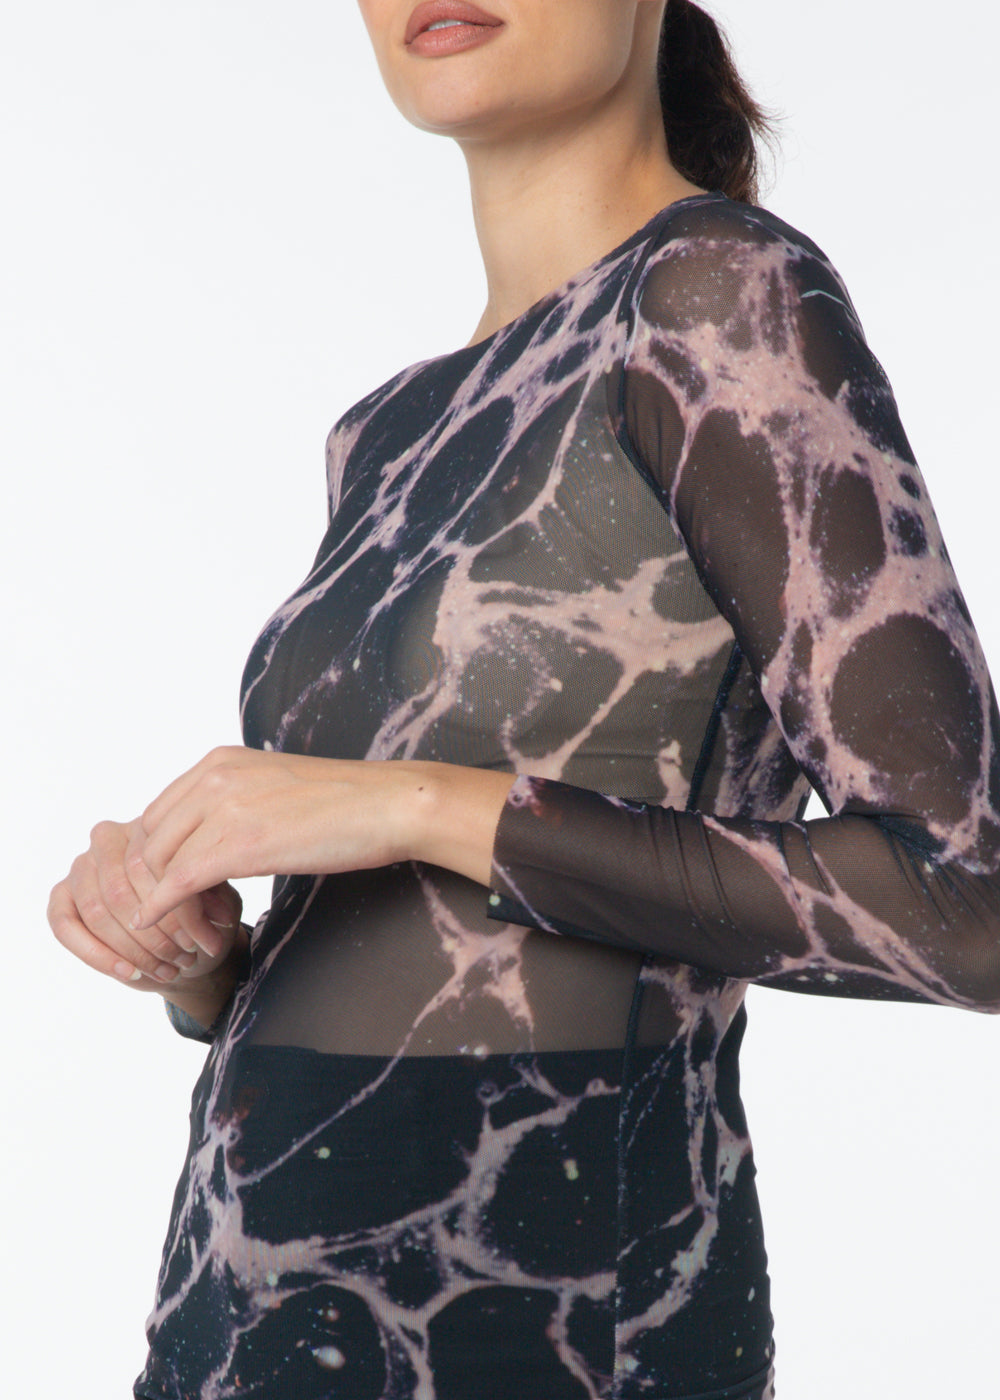 Web Exclusive Print - Constellation Giselle Mesh Top